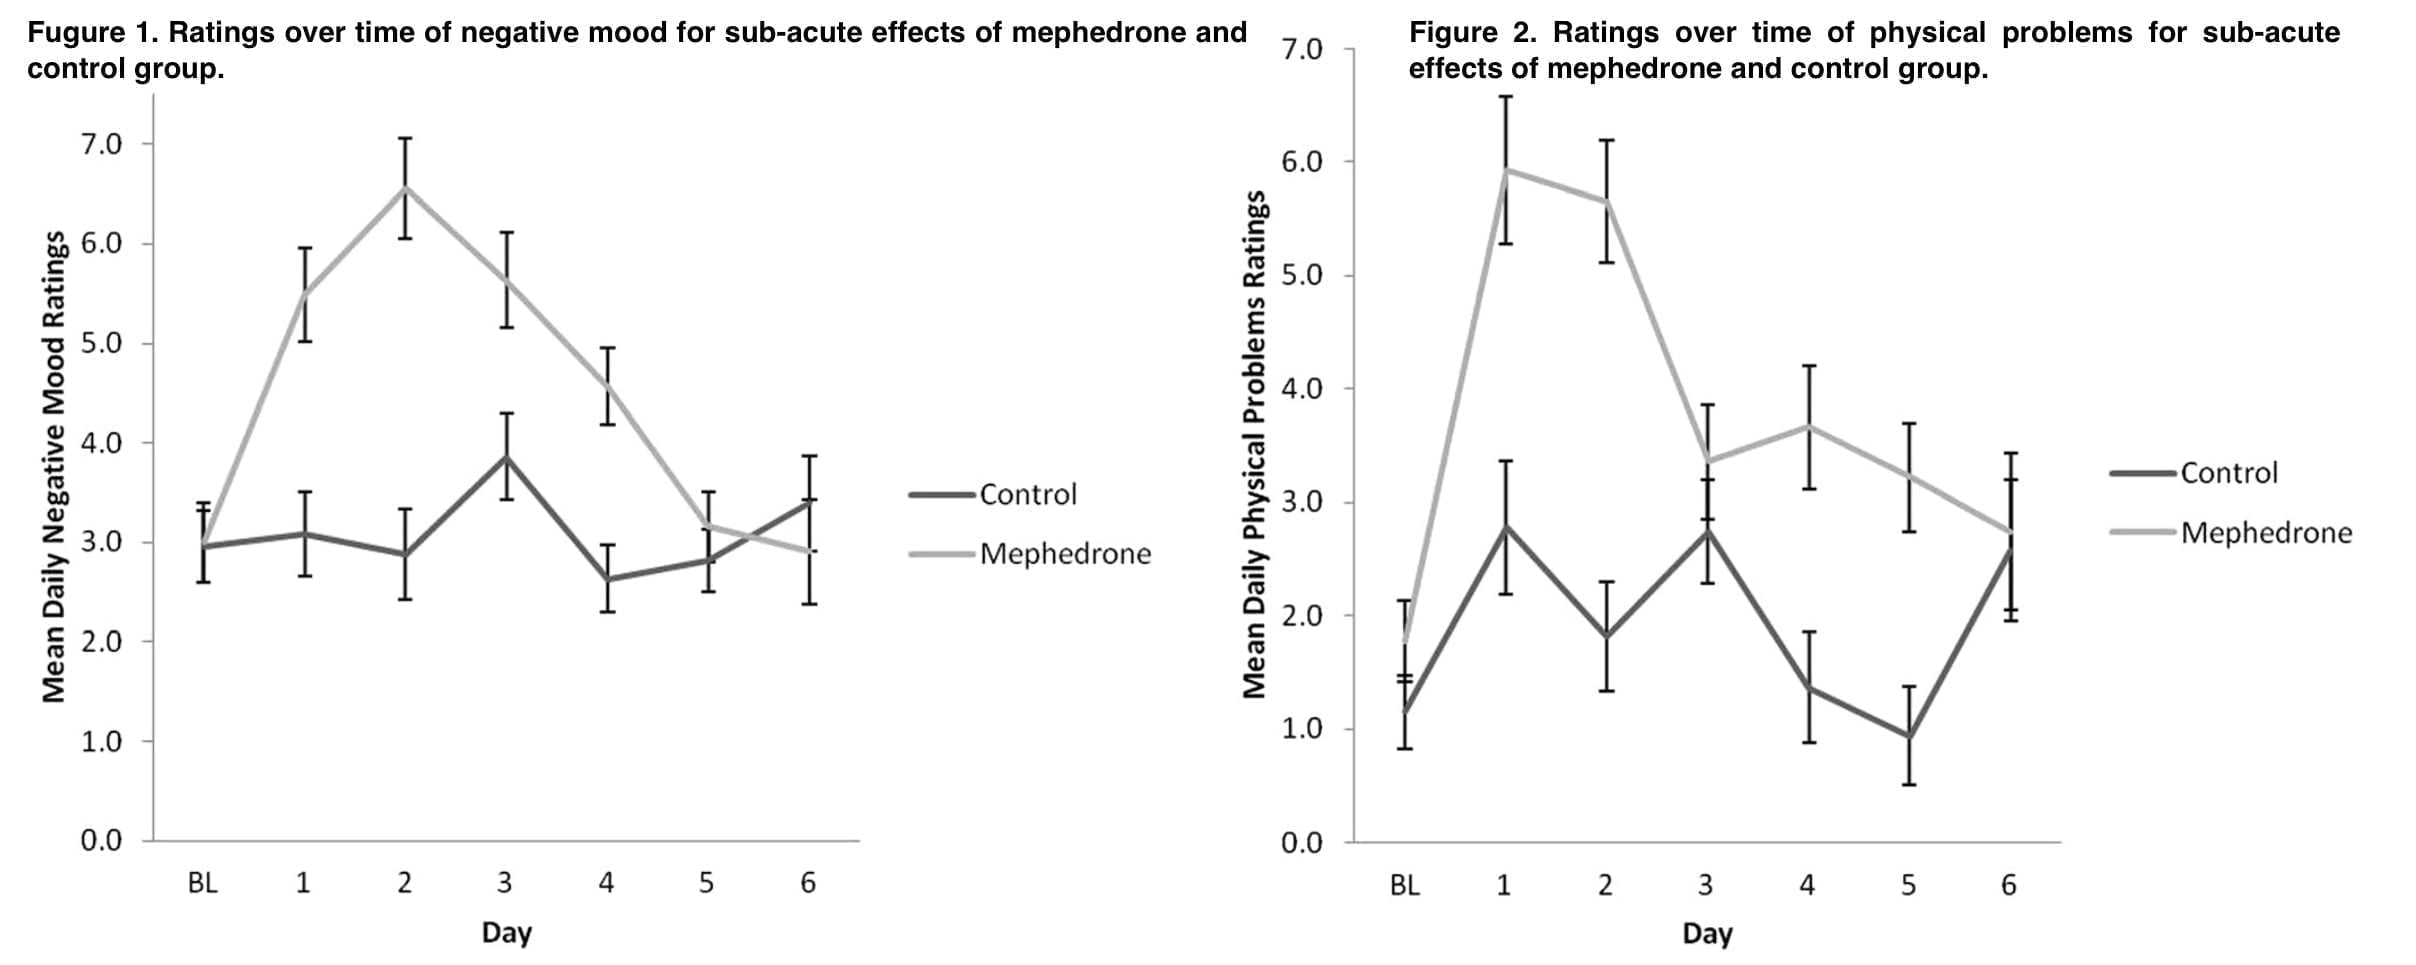 Effects of mephedrone on sleep, mood and cognition